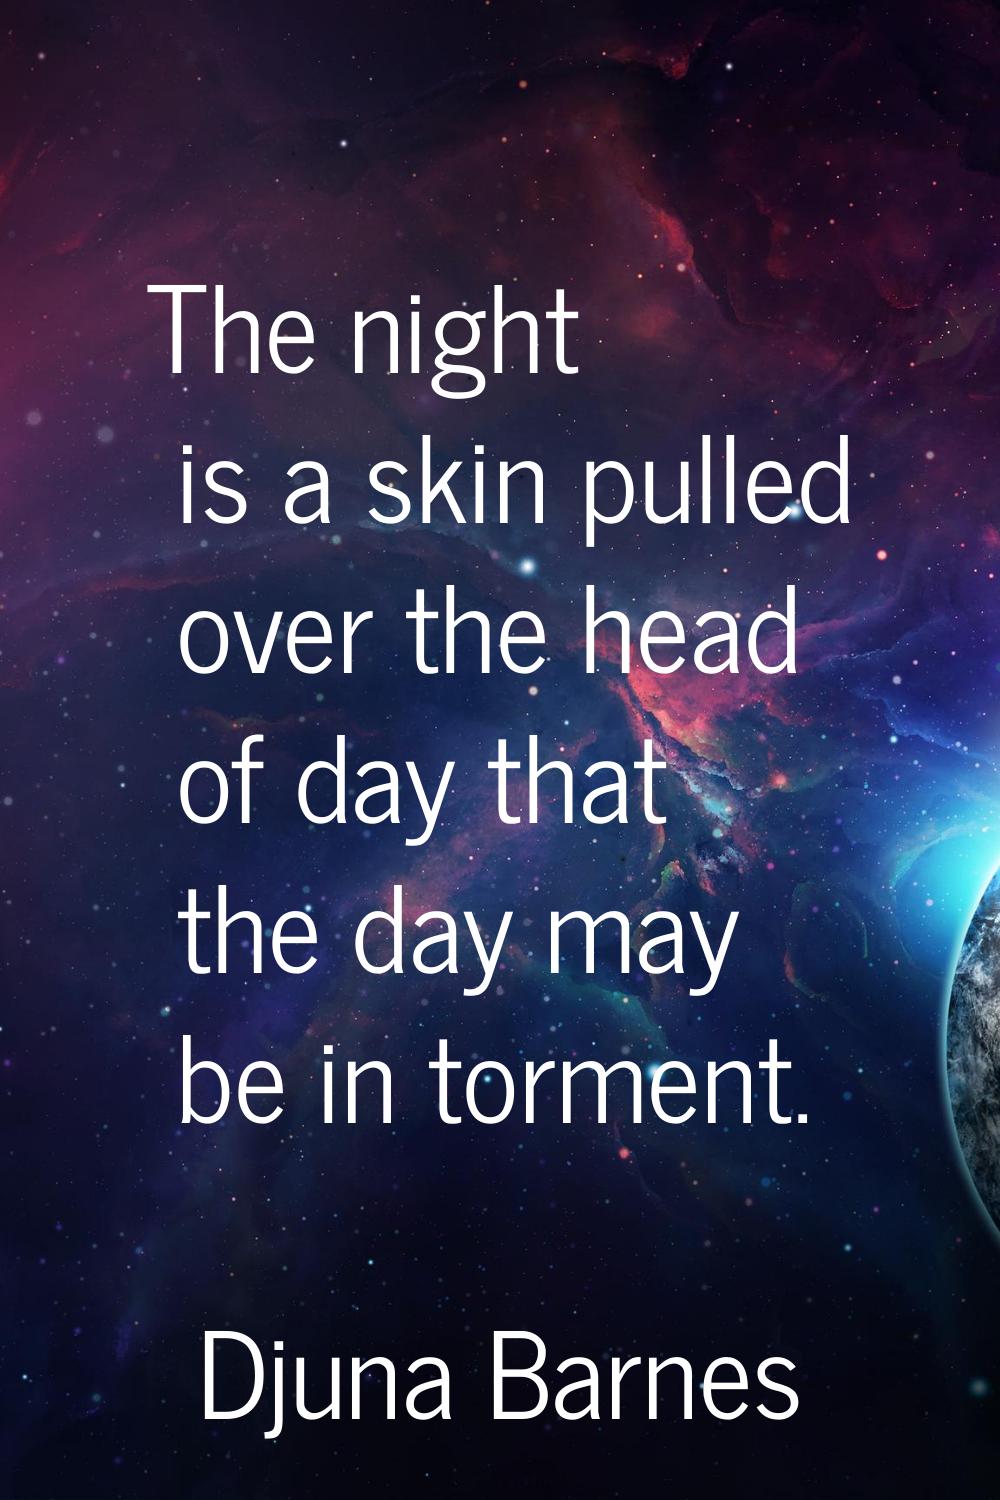 The night is a skin pulled over the head of day that the day may be in torment.